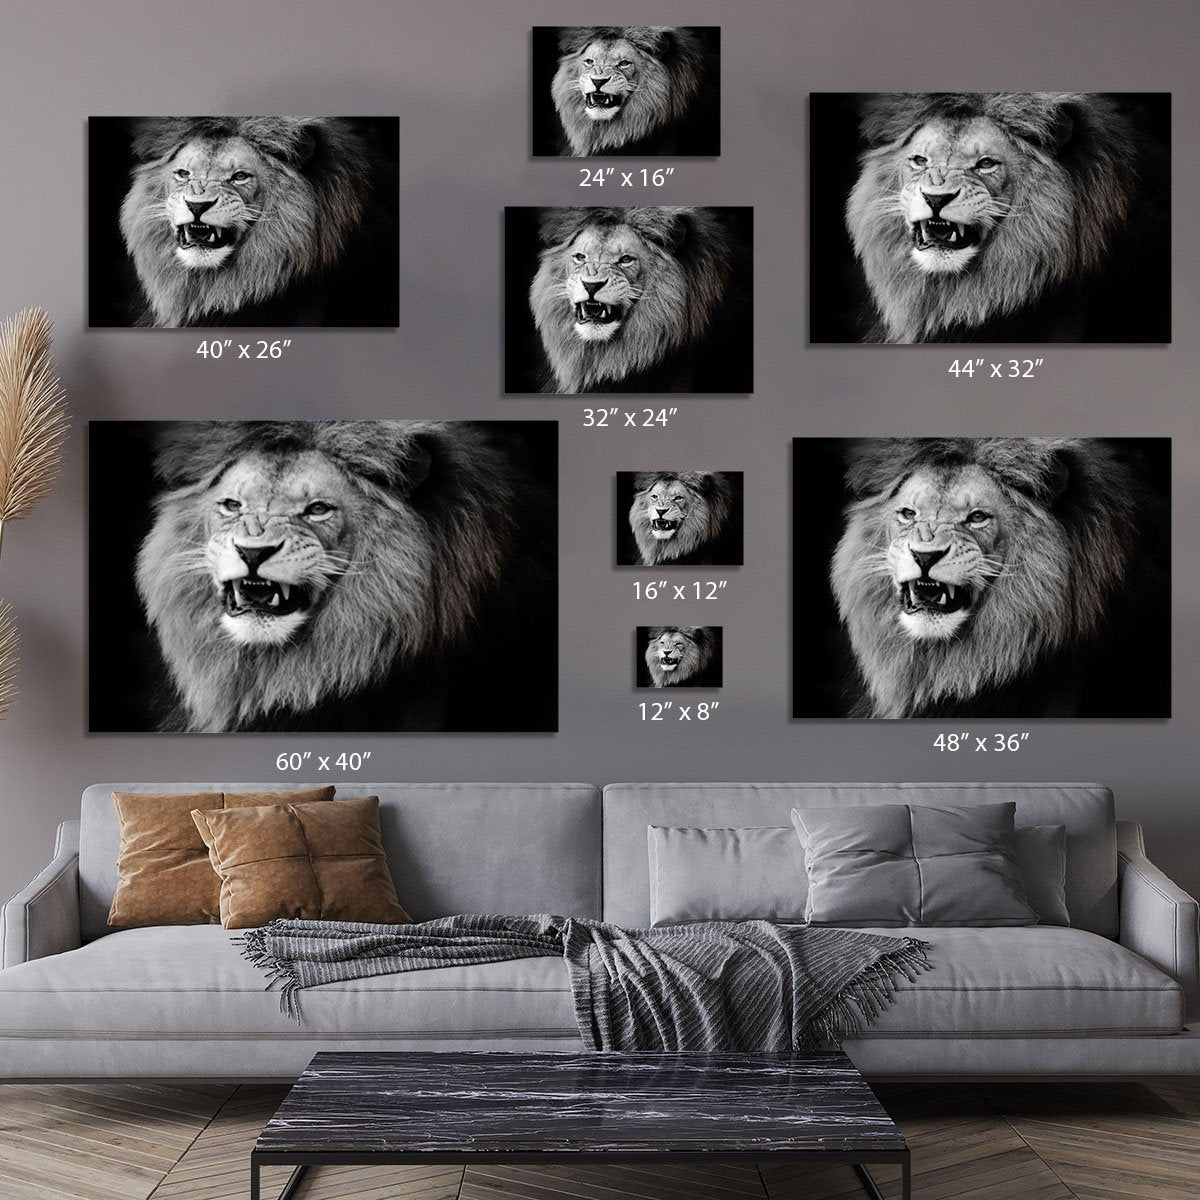 Wild lion portrait in black and white. Canvas Print or Poster